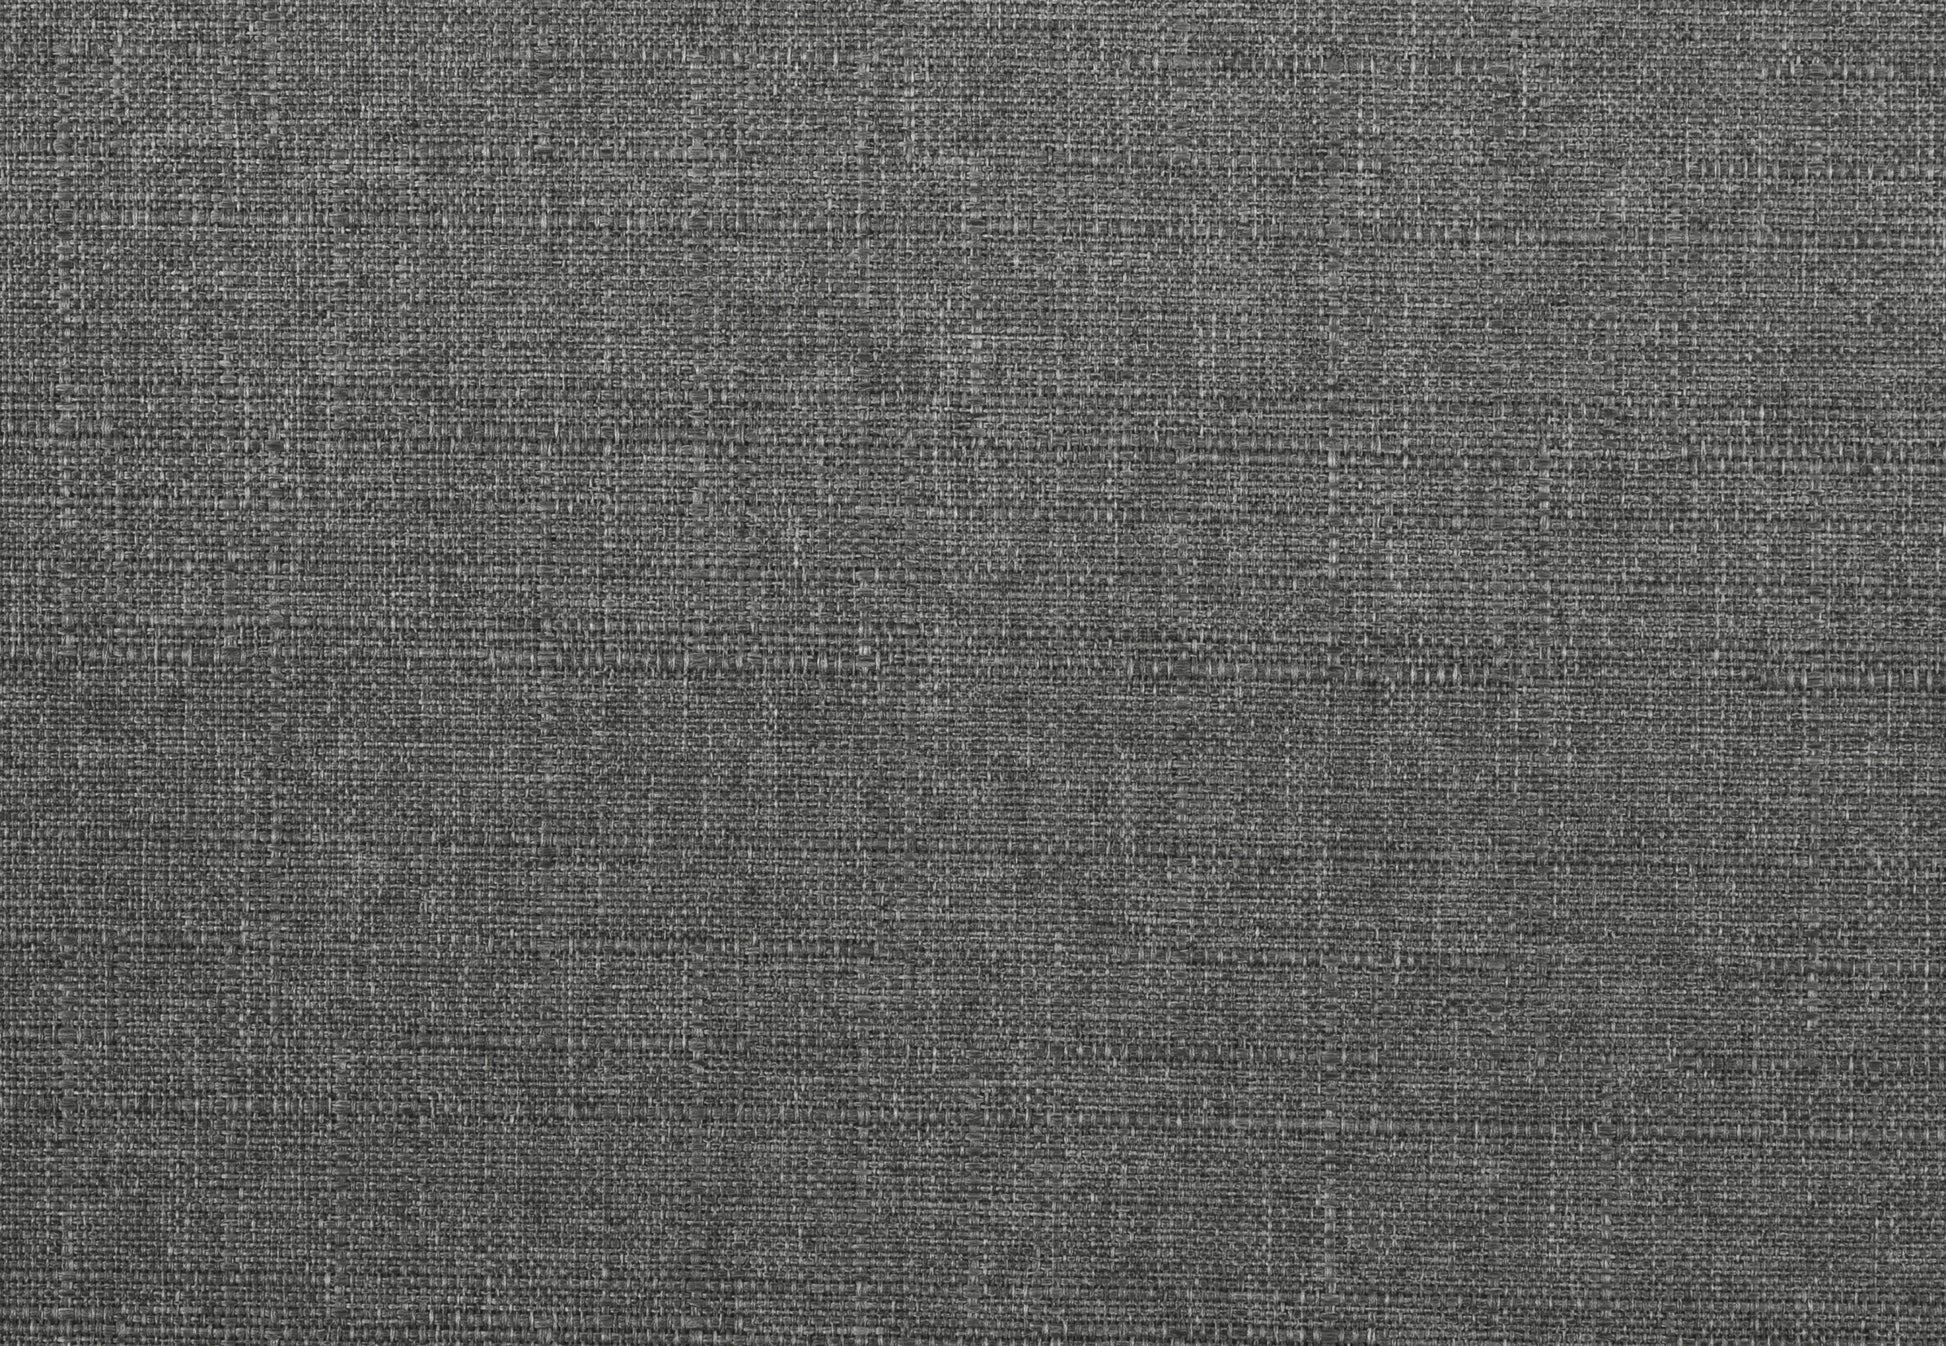 Modern Home Furniture Gray Fabric Upholstered 1pc gray-primary living space-retro-solid wood